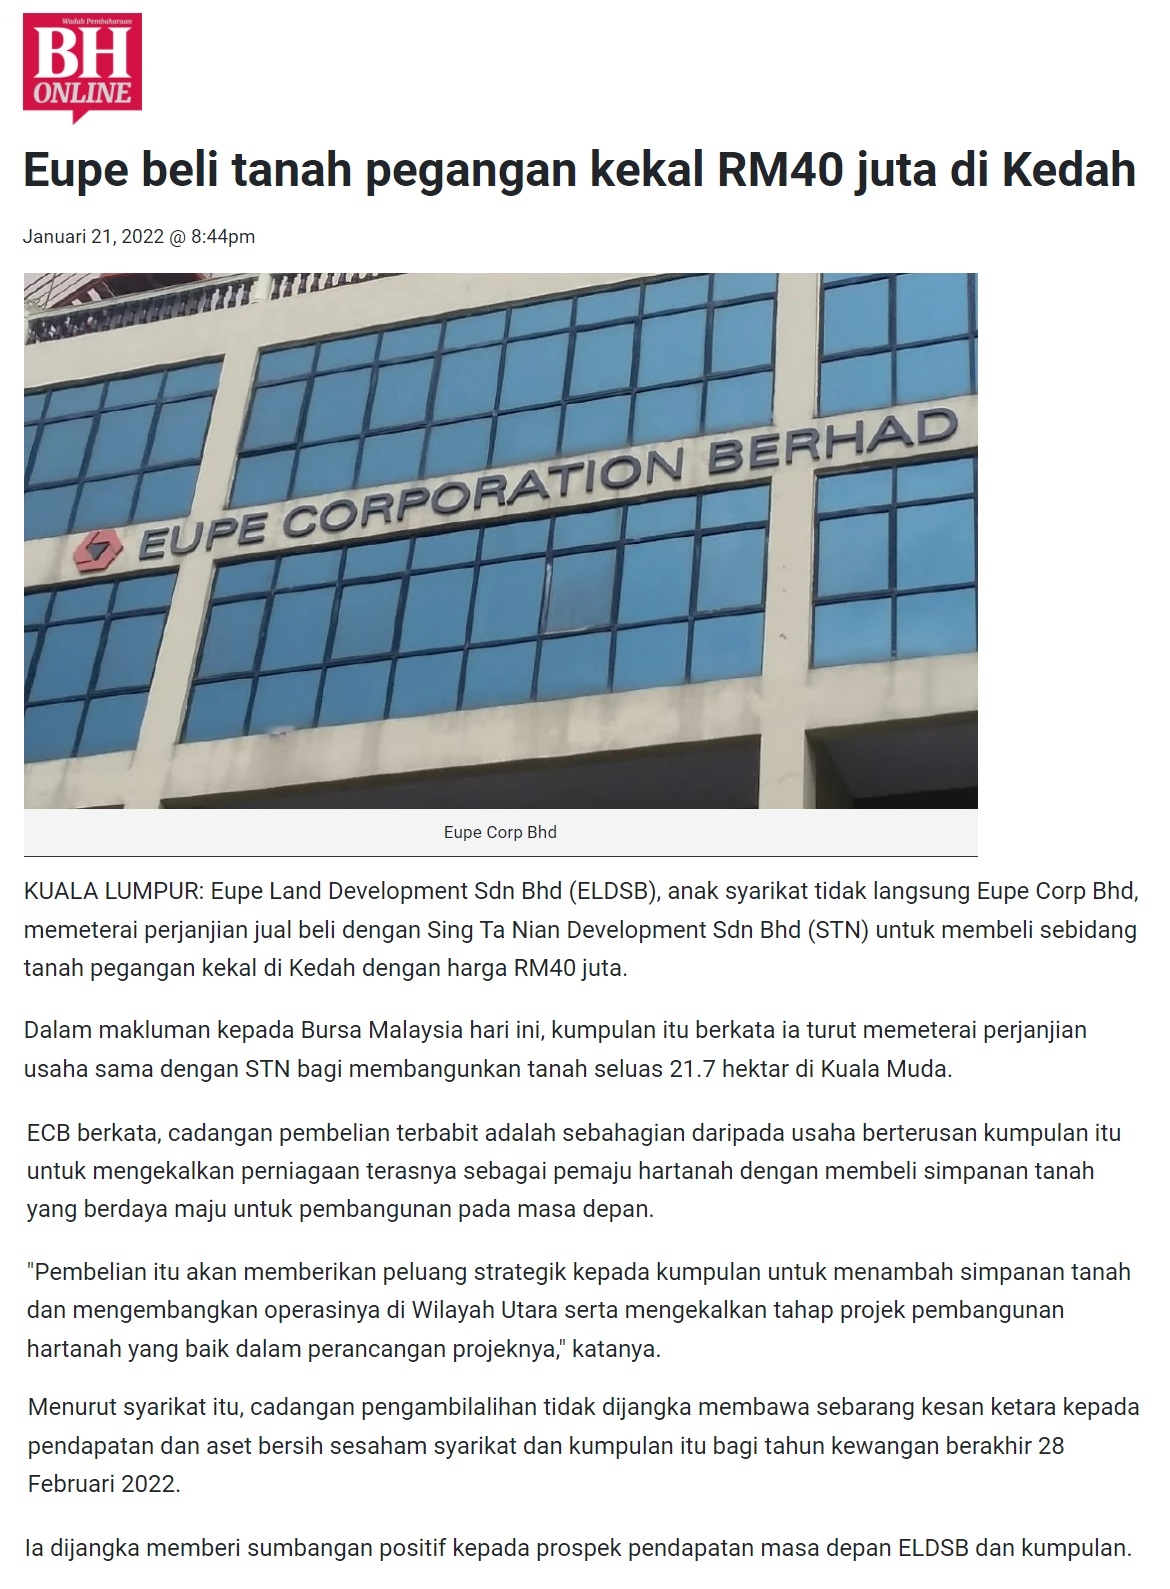 The Edge, The Star, Berita Harian : Acquisition of Freehold Land in Kedah